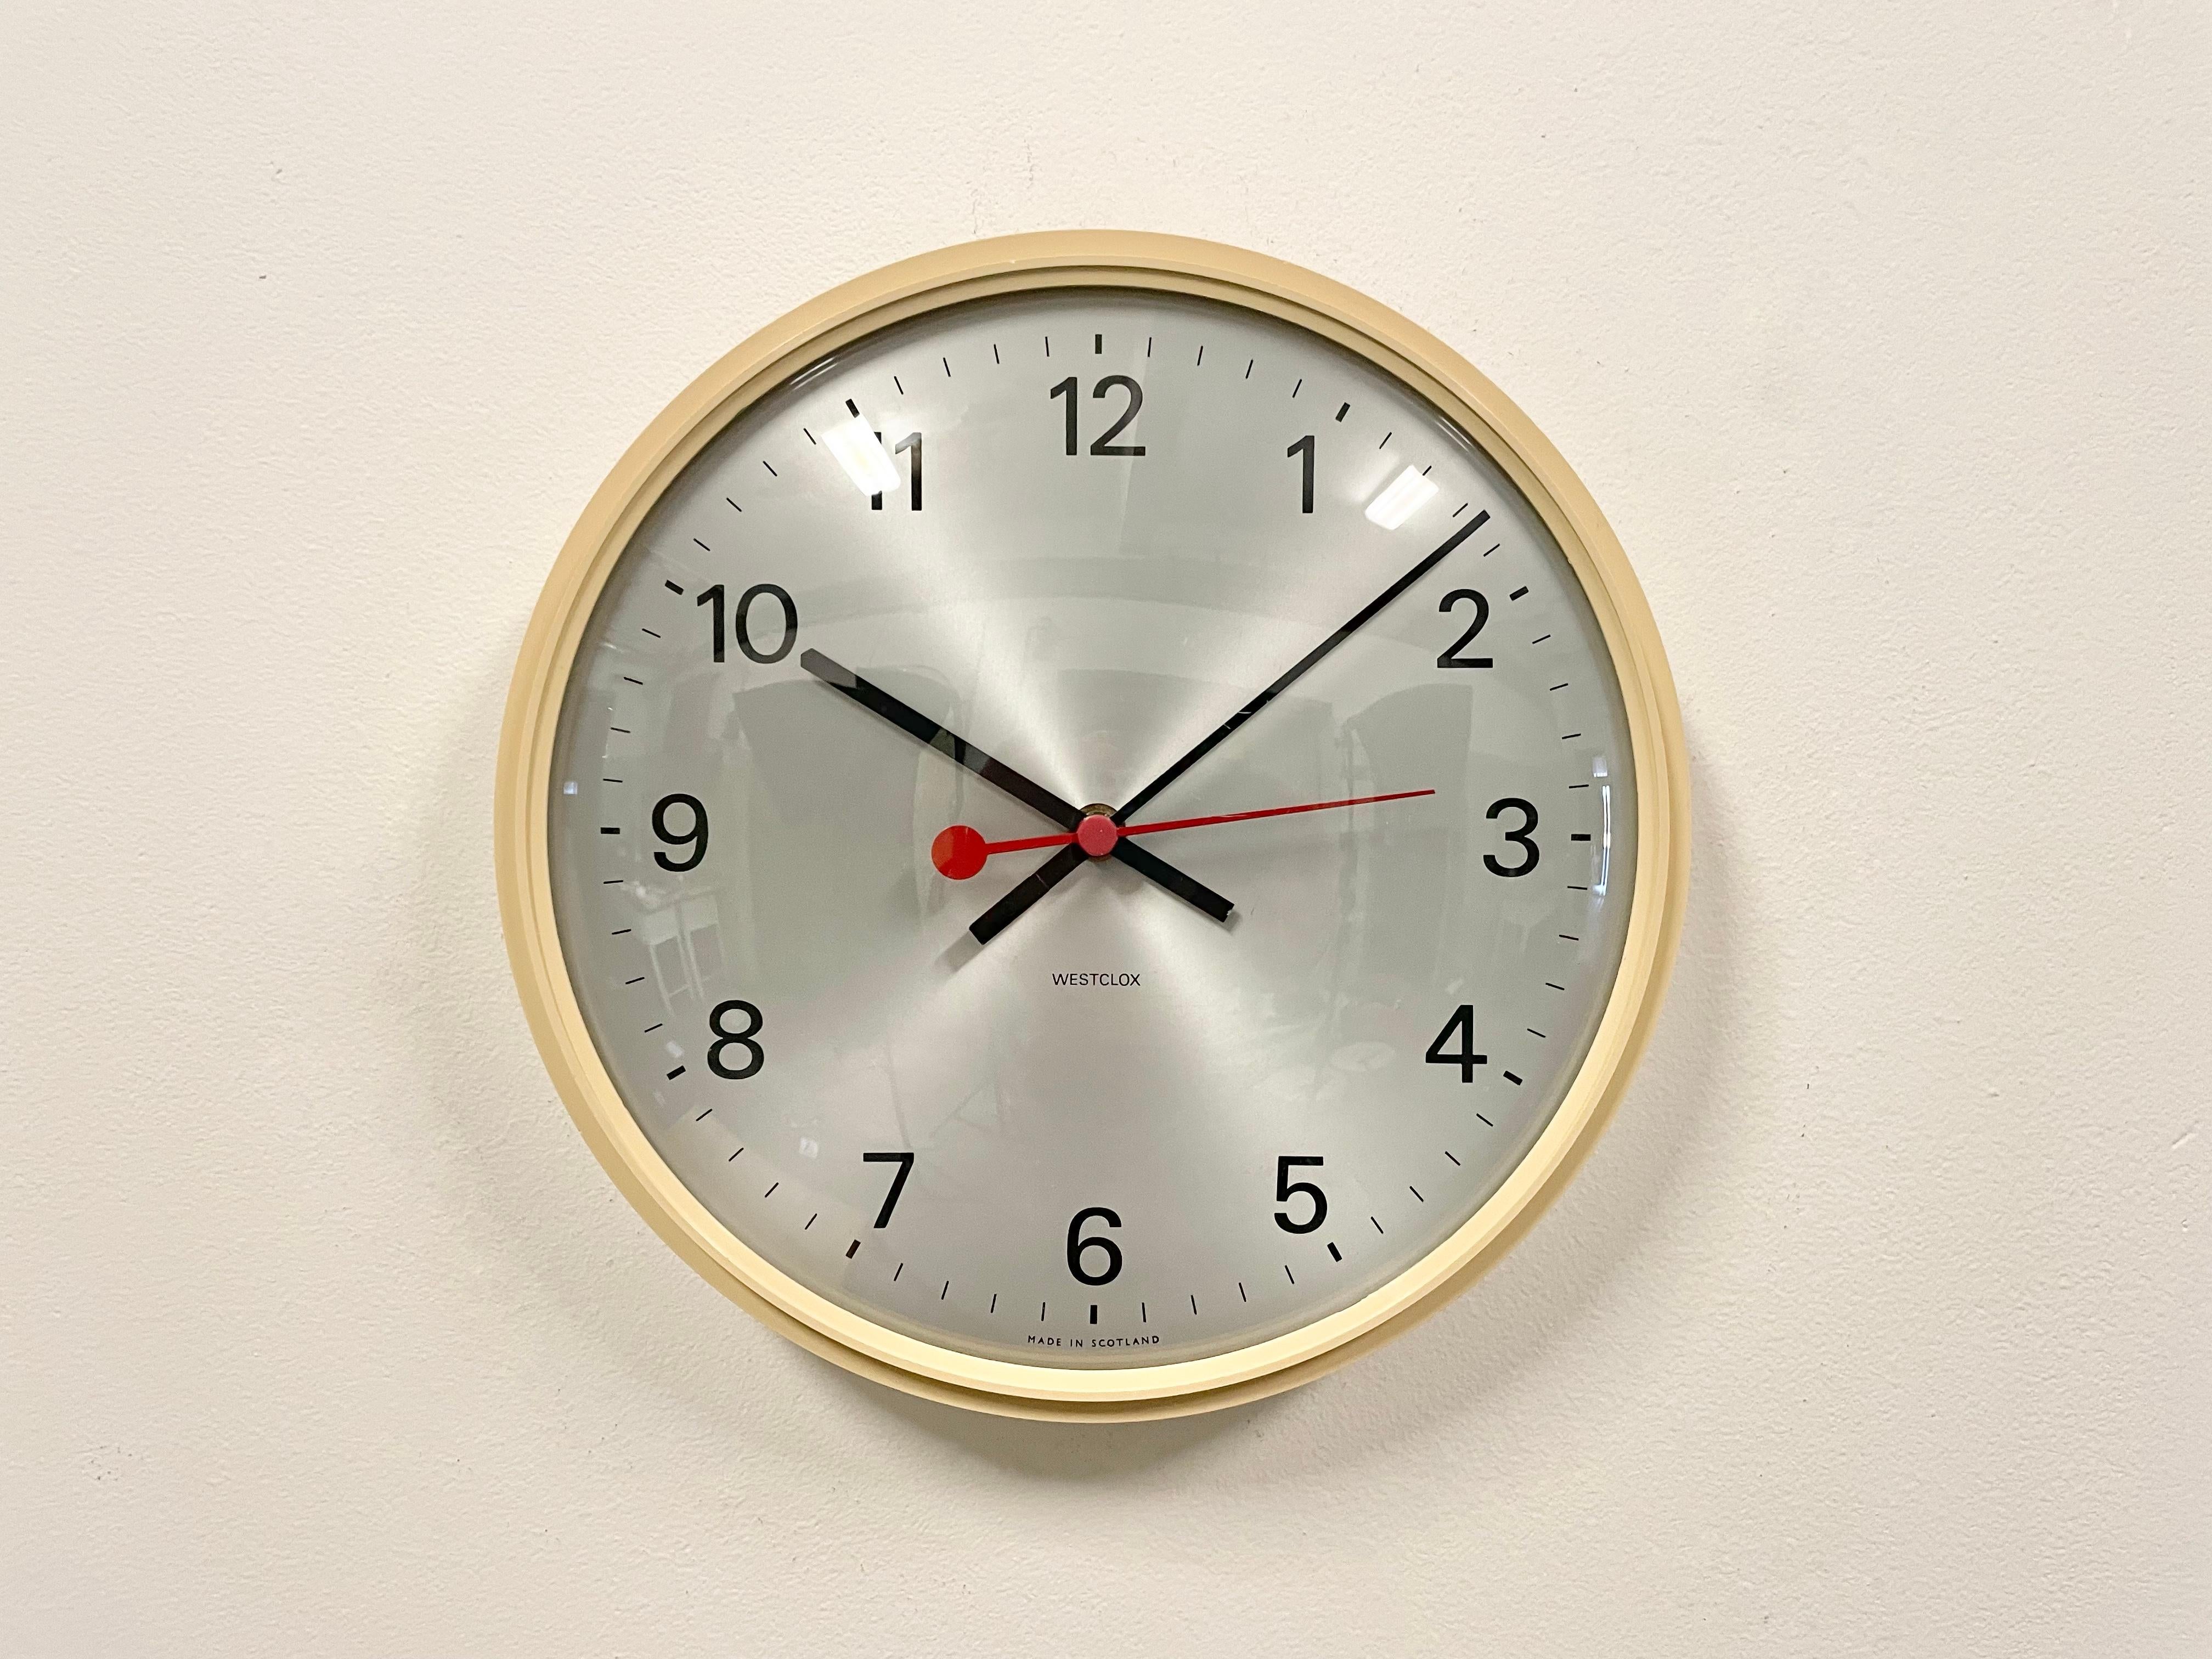 Vintage industrial wall clock produced by Westclox in Scotland during the 1970s. It features a beige bakelite frame, a silver dial, an aluminium hands and a curved clear glass cover. The piece has been converted into a battery-powered clockwork and